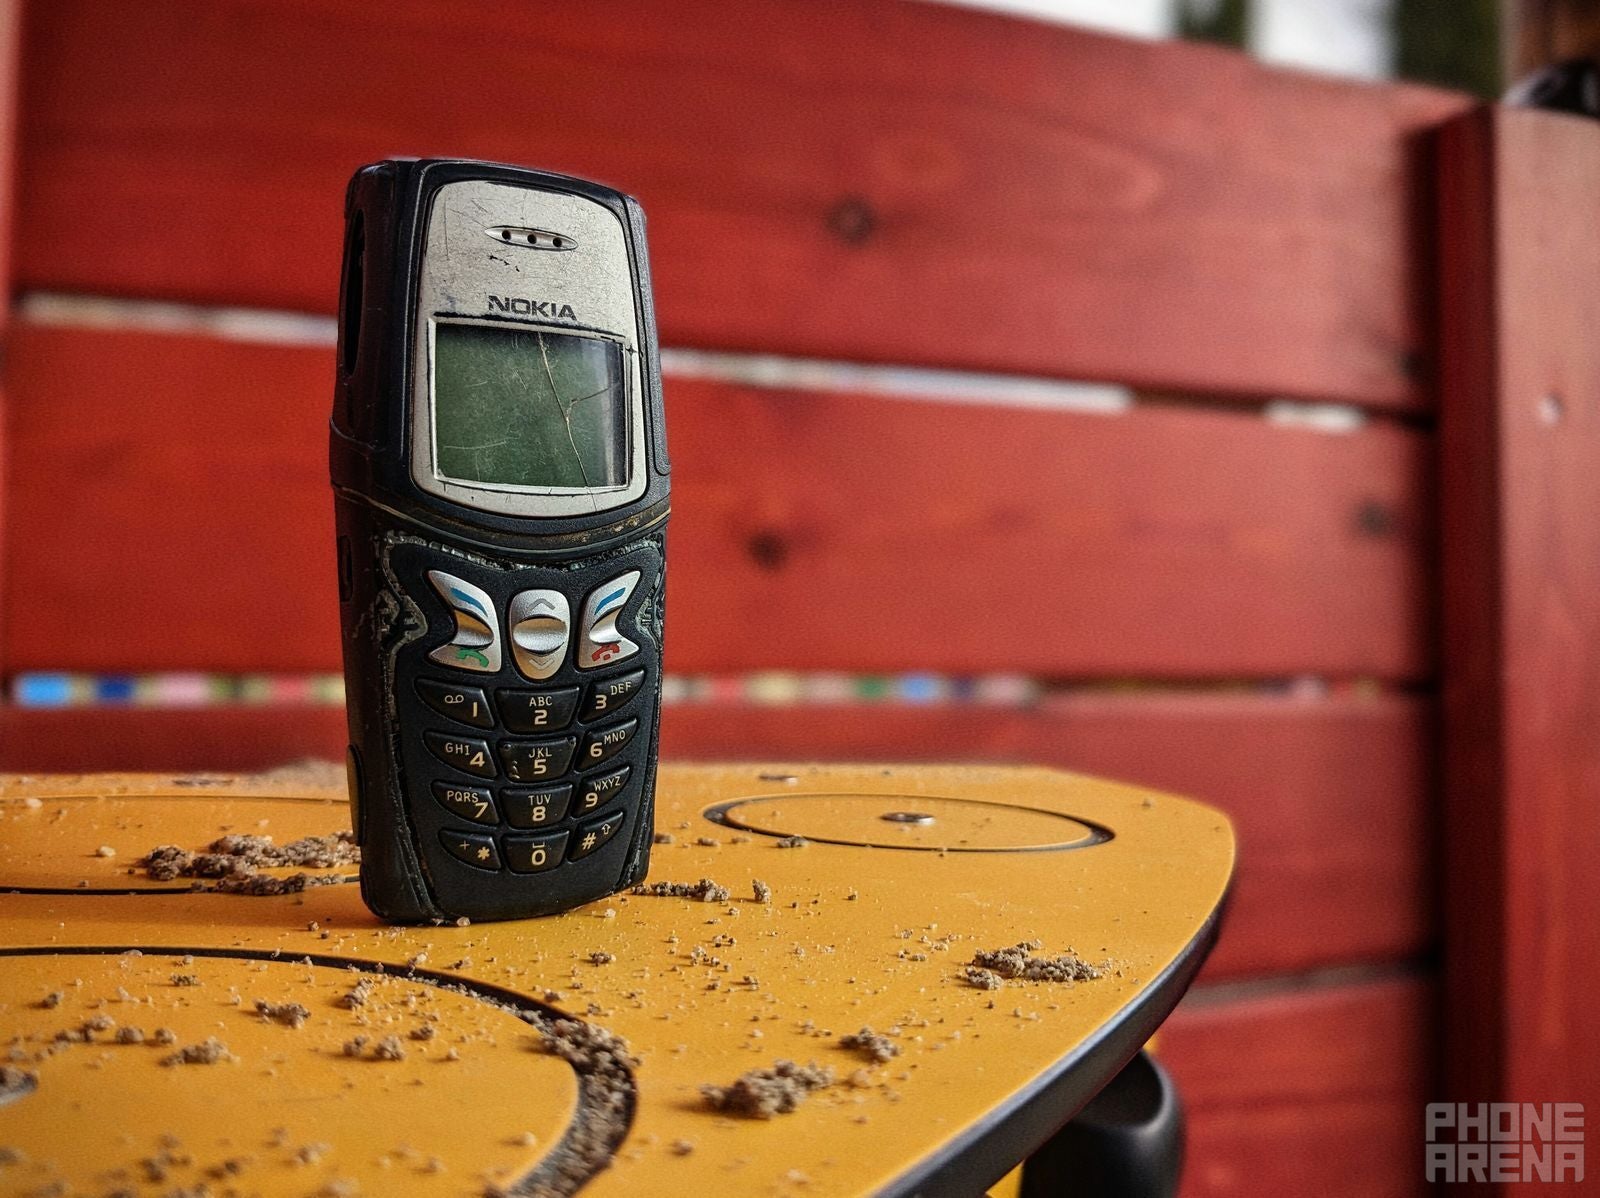 Even 20 years later, it might be beat-up and with a dead battery, but it still works. - Nokia 3310 might have been indestructible, but my 5210 beat it by a long shot